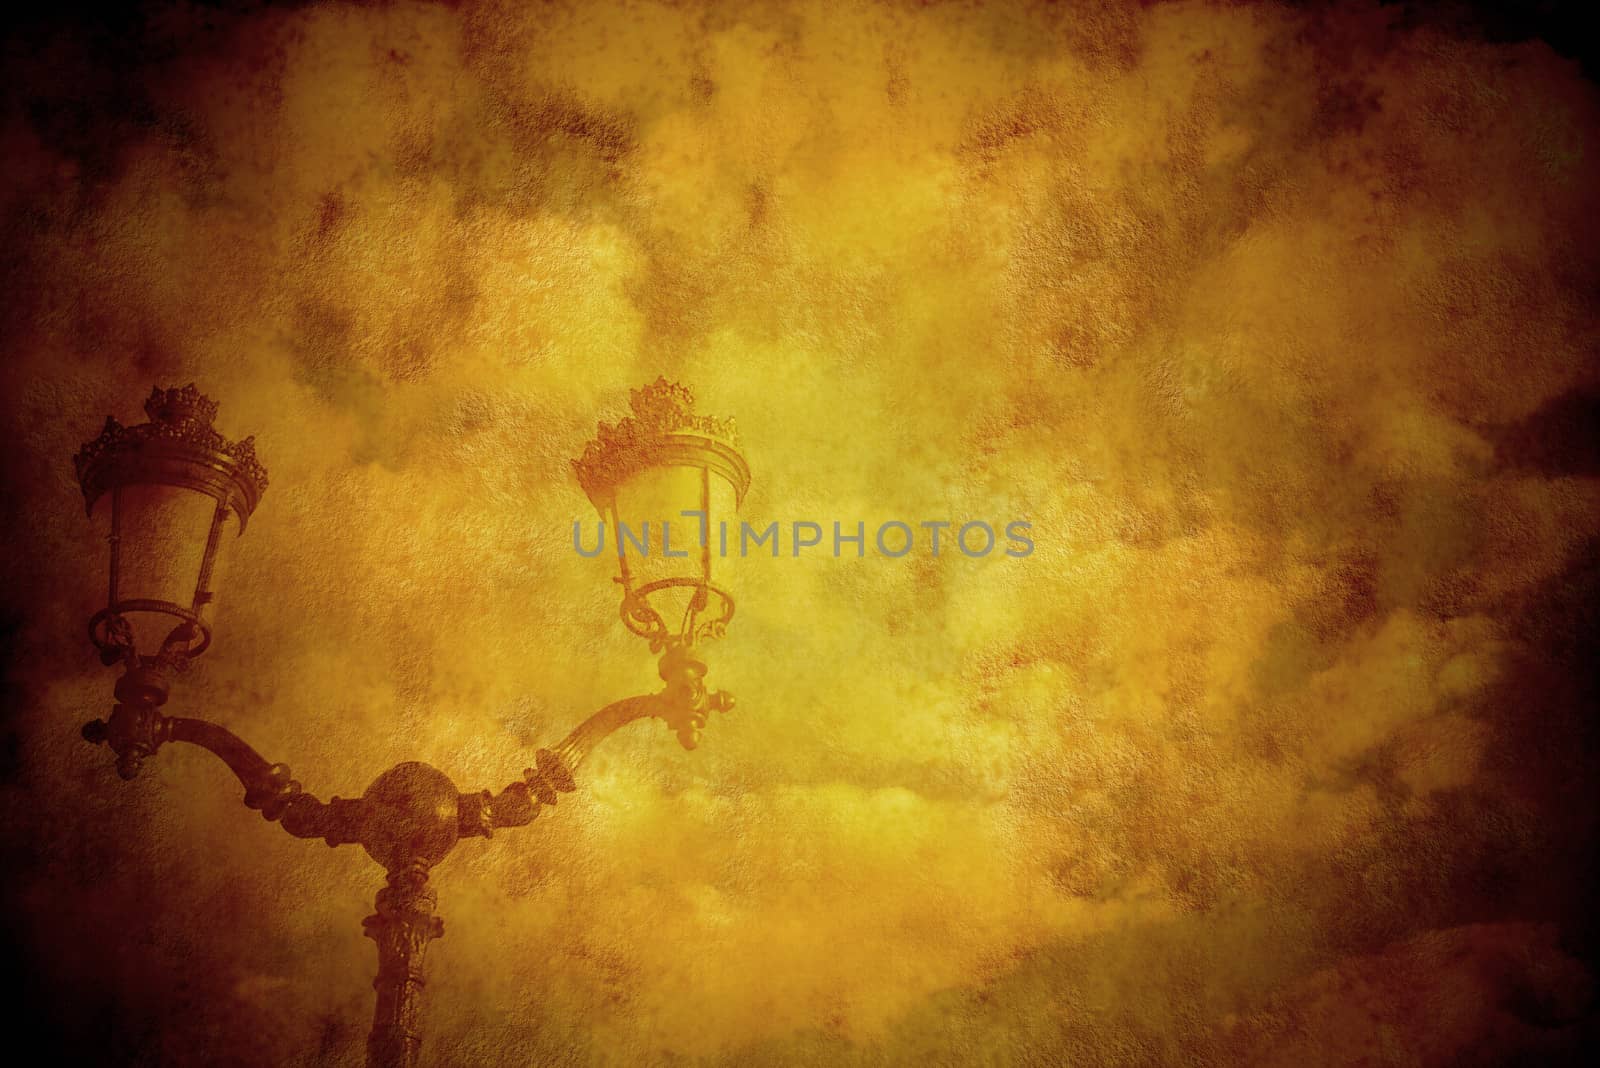 background vintage style lamp and clouds, sepia tone and texture of parchment